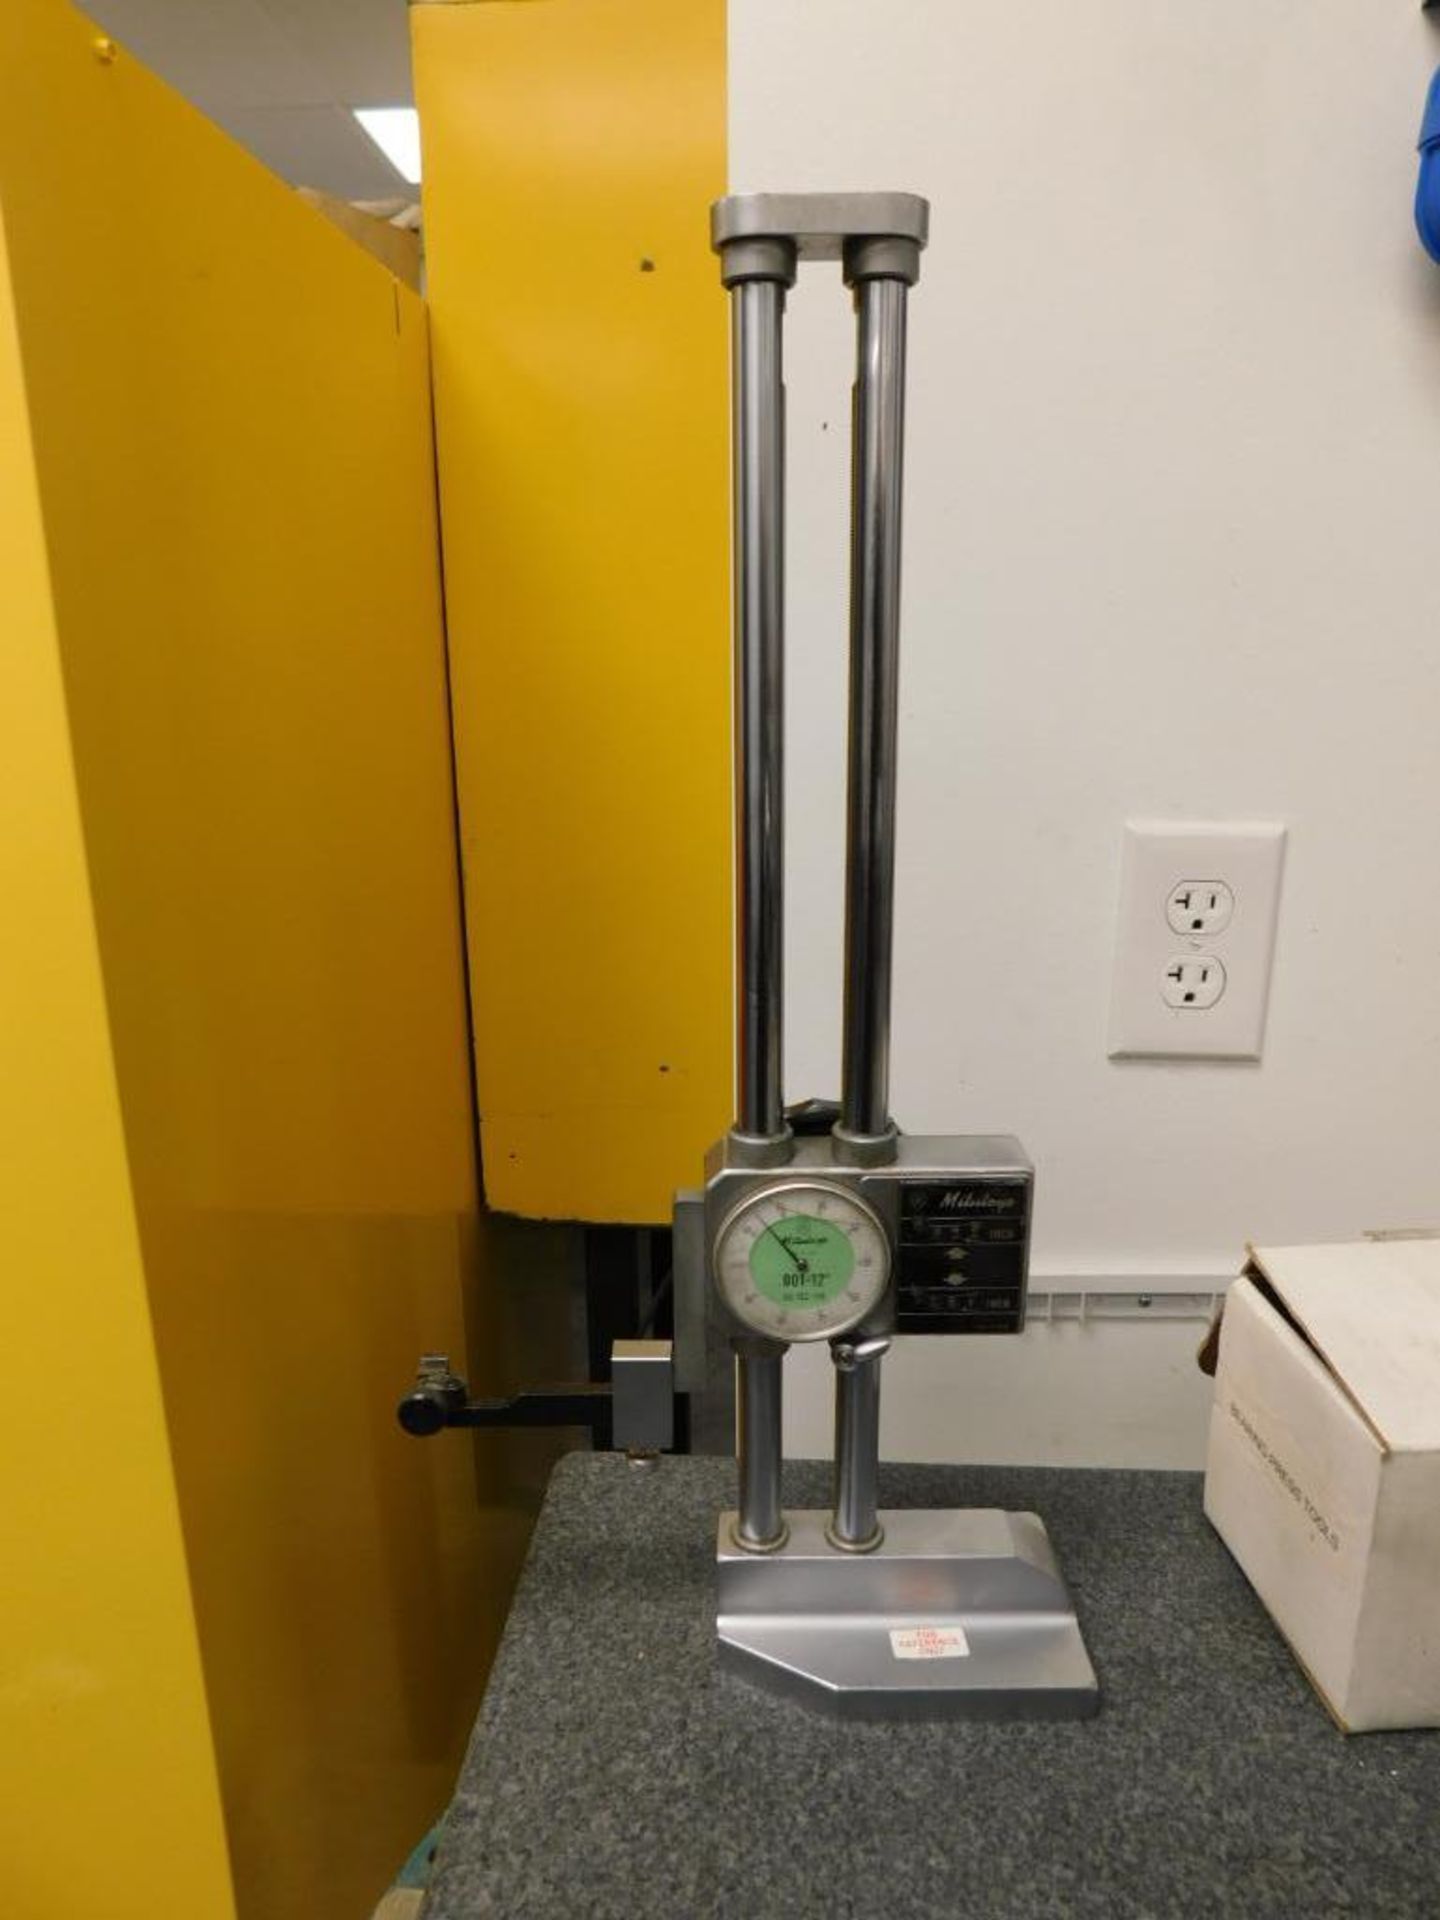 24" x 18" x 4" Granite Surface Plate on Stand w/Mitutoyo Dial Height Indicator & Dial Stand - Image 2 of 2